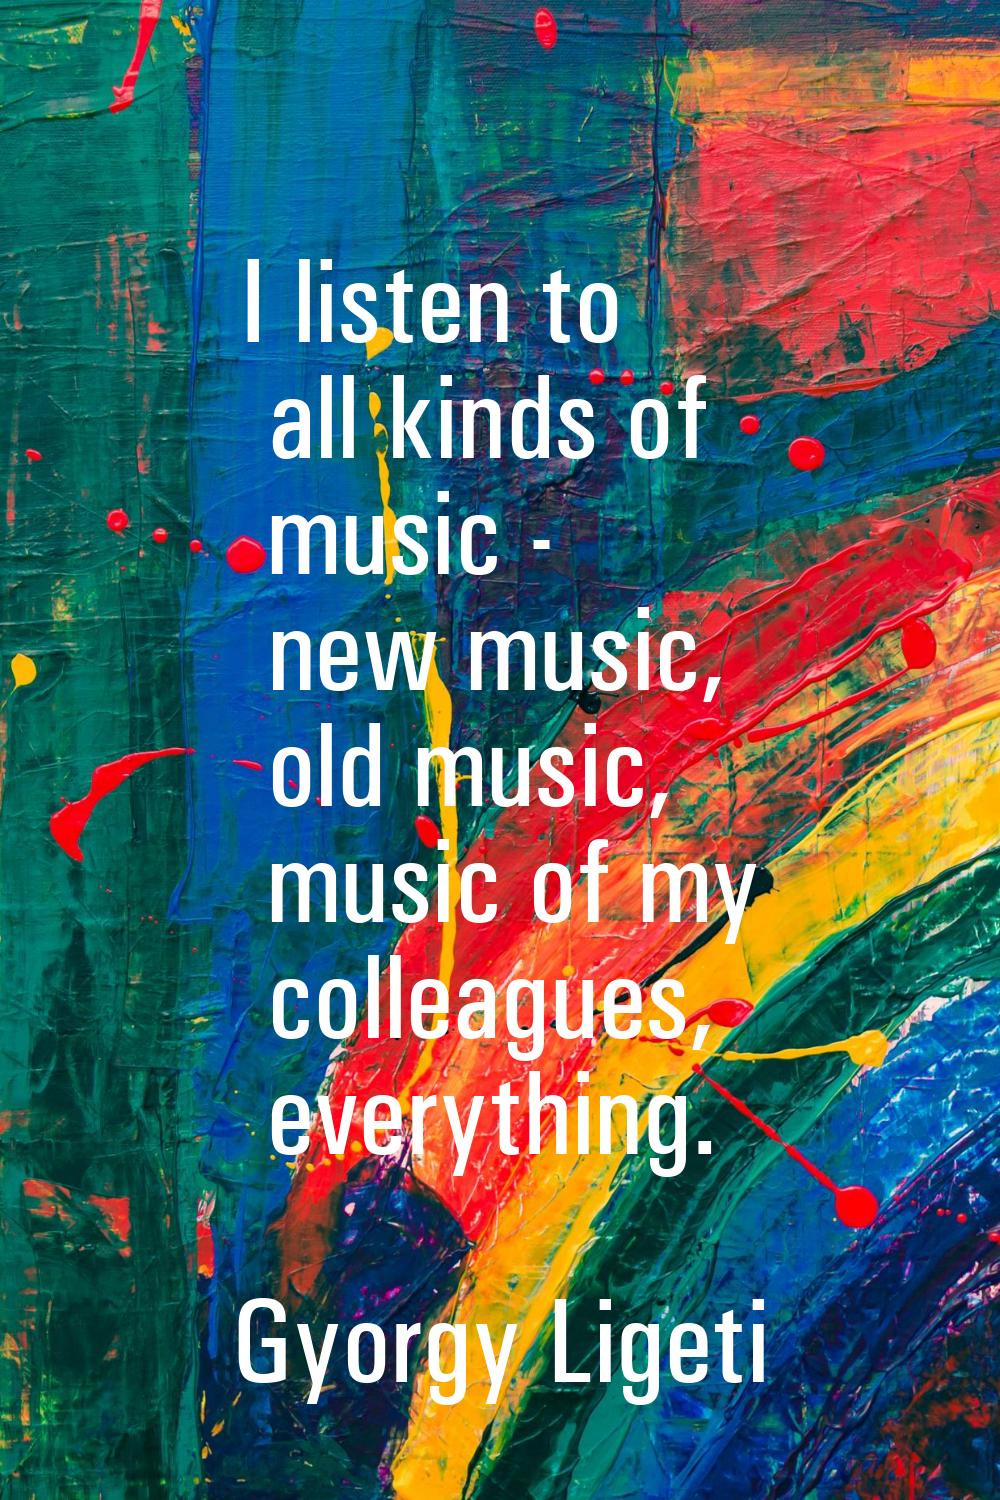 I listen to all kinds of music - new music, old music, music of my colleagues, everything.